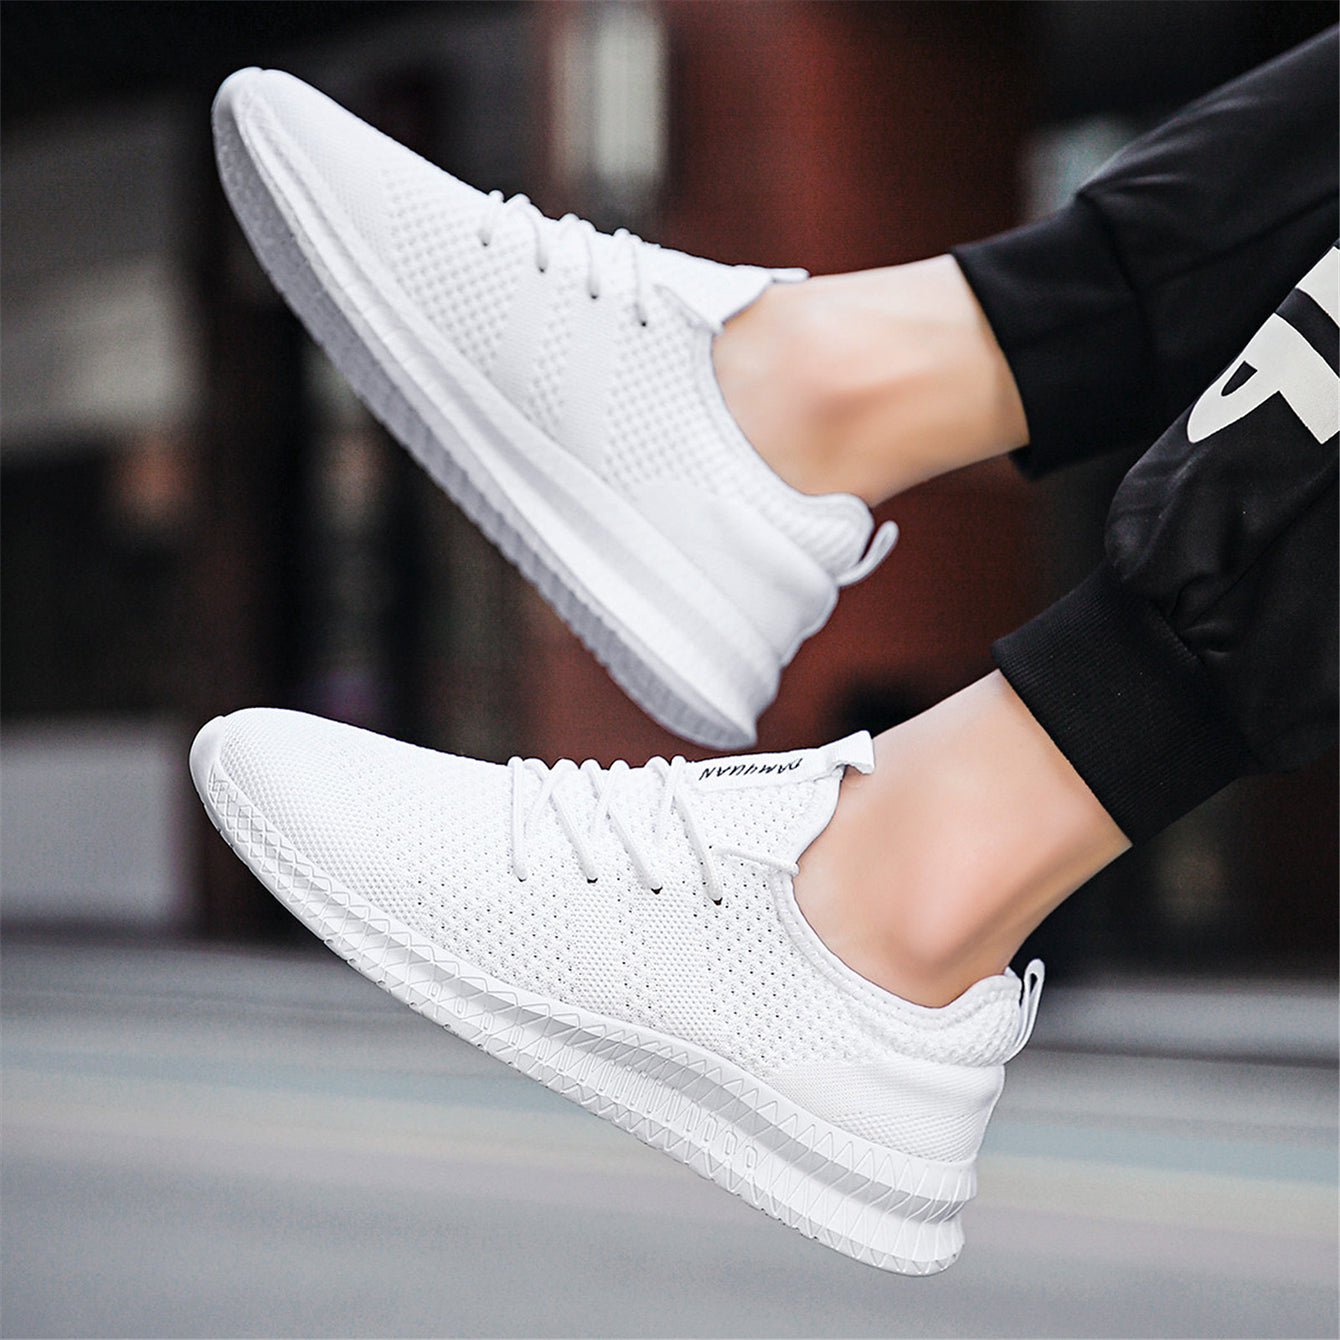 Men's Running Shoes Knit Breathable Lightweight Running Shoes Couple Outdoor Athletic Walking Sneakers, Spring And Summer